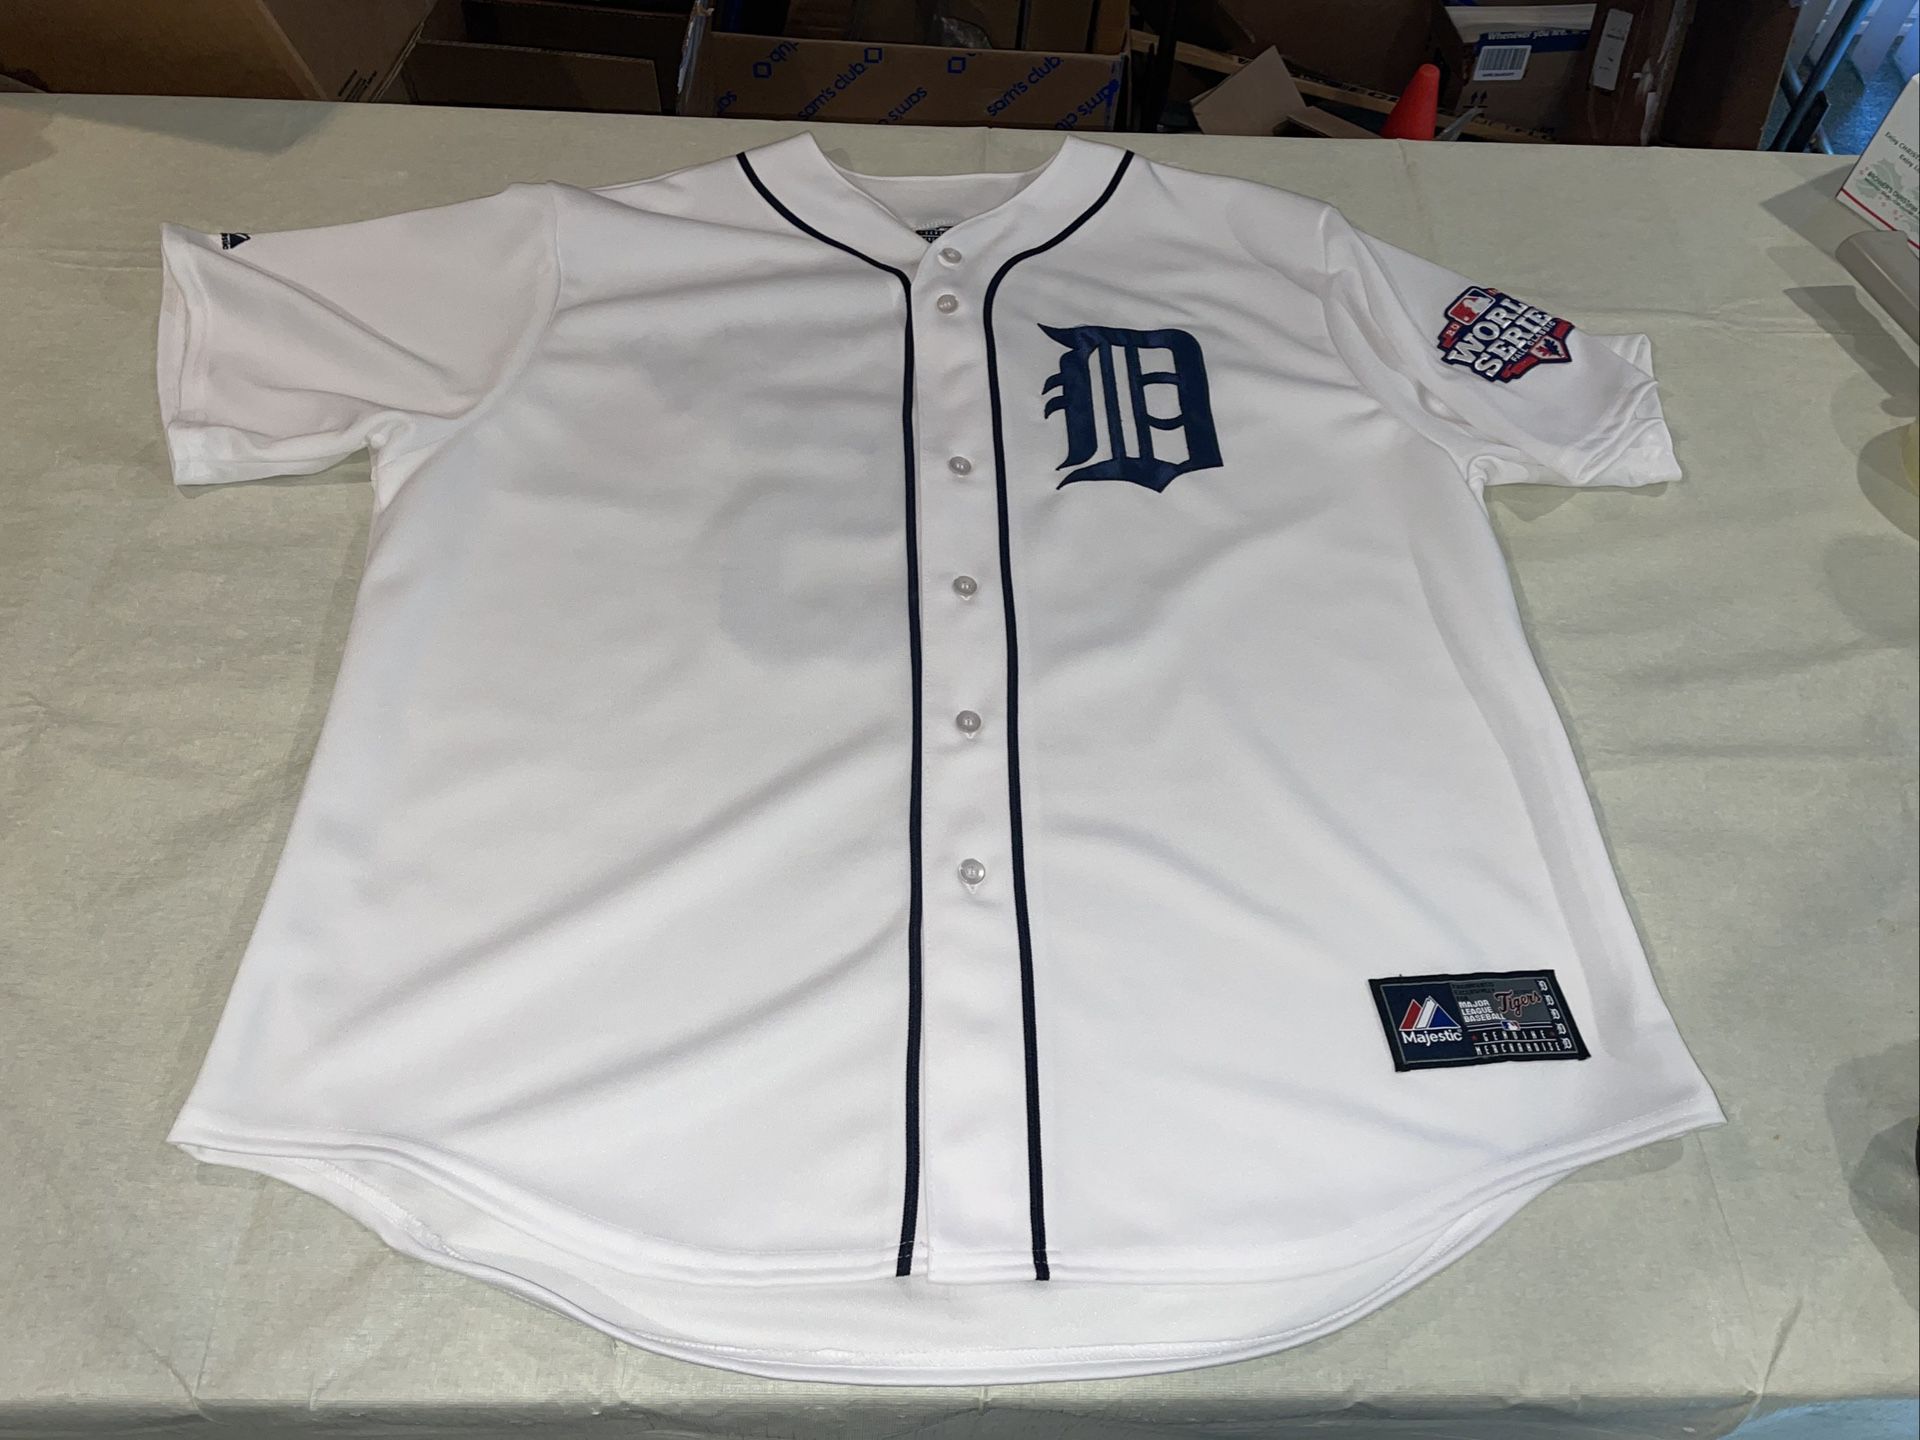 Wearing the Detroit Tigers MBL baseball jersey, made by Majestic